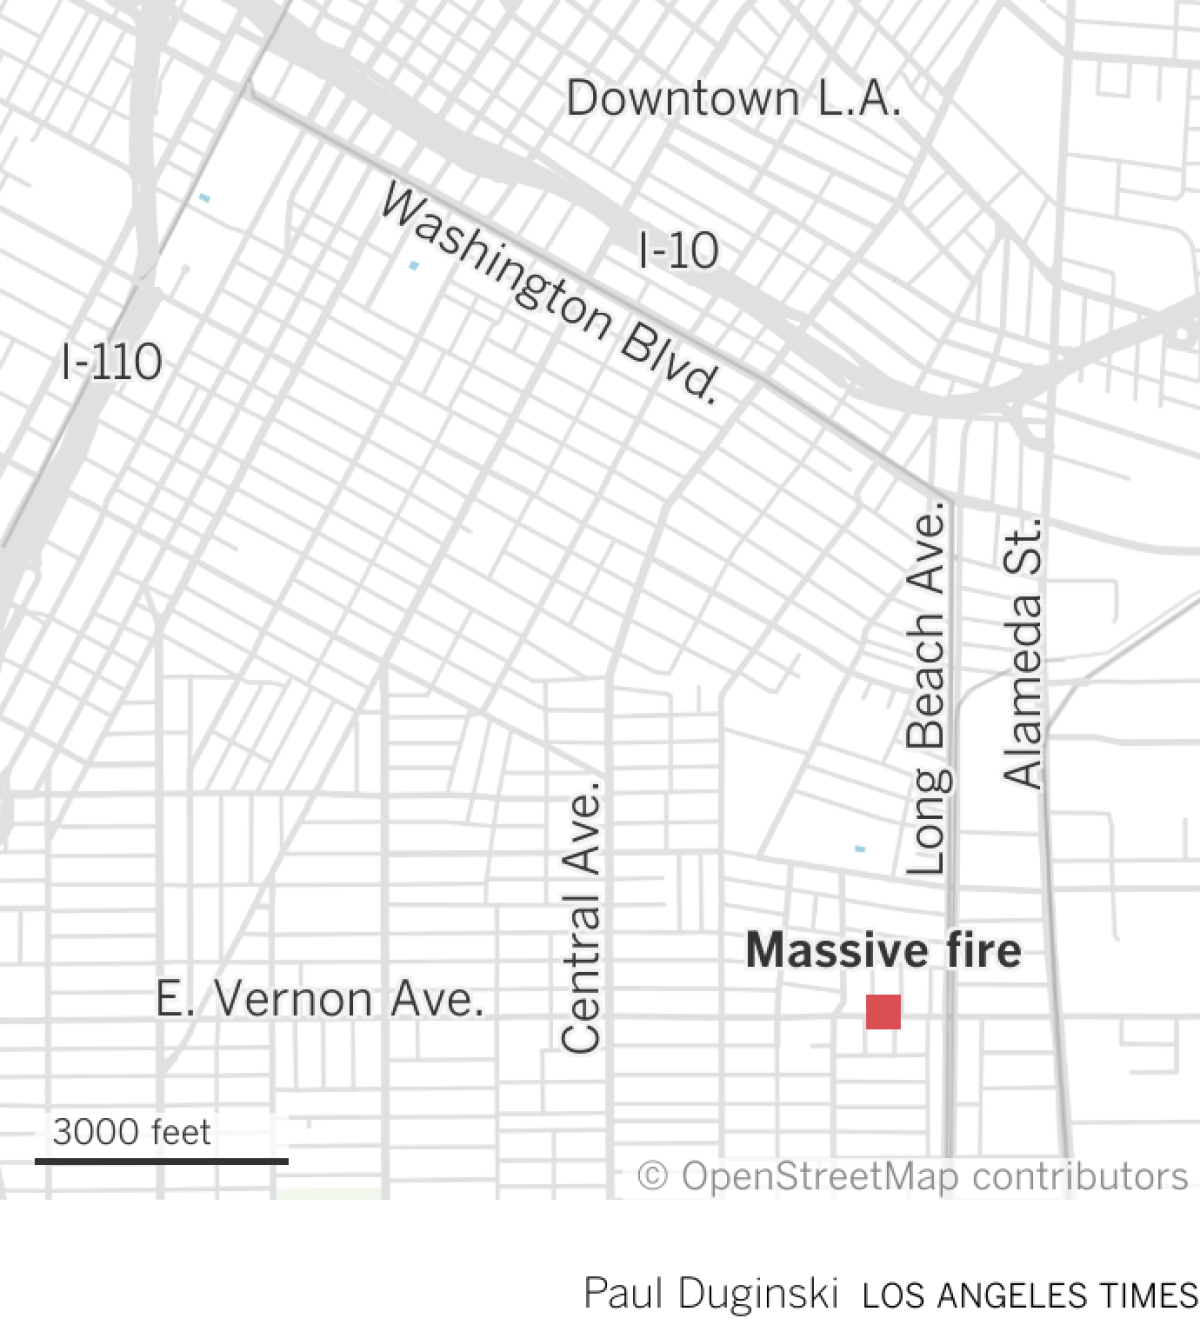 Location of fire that destroyed several in South Los Angeles.